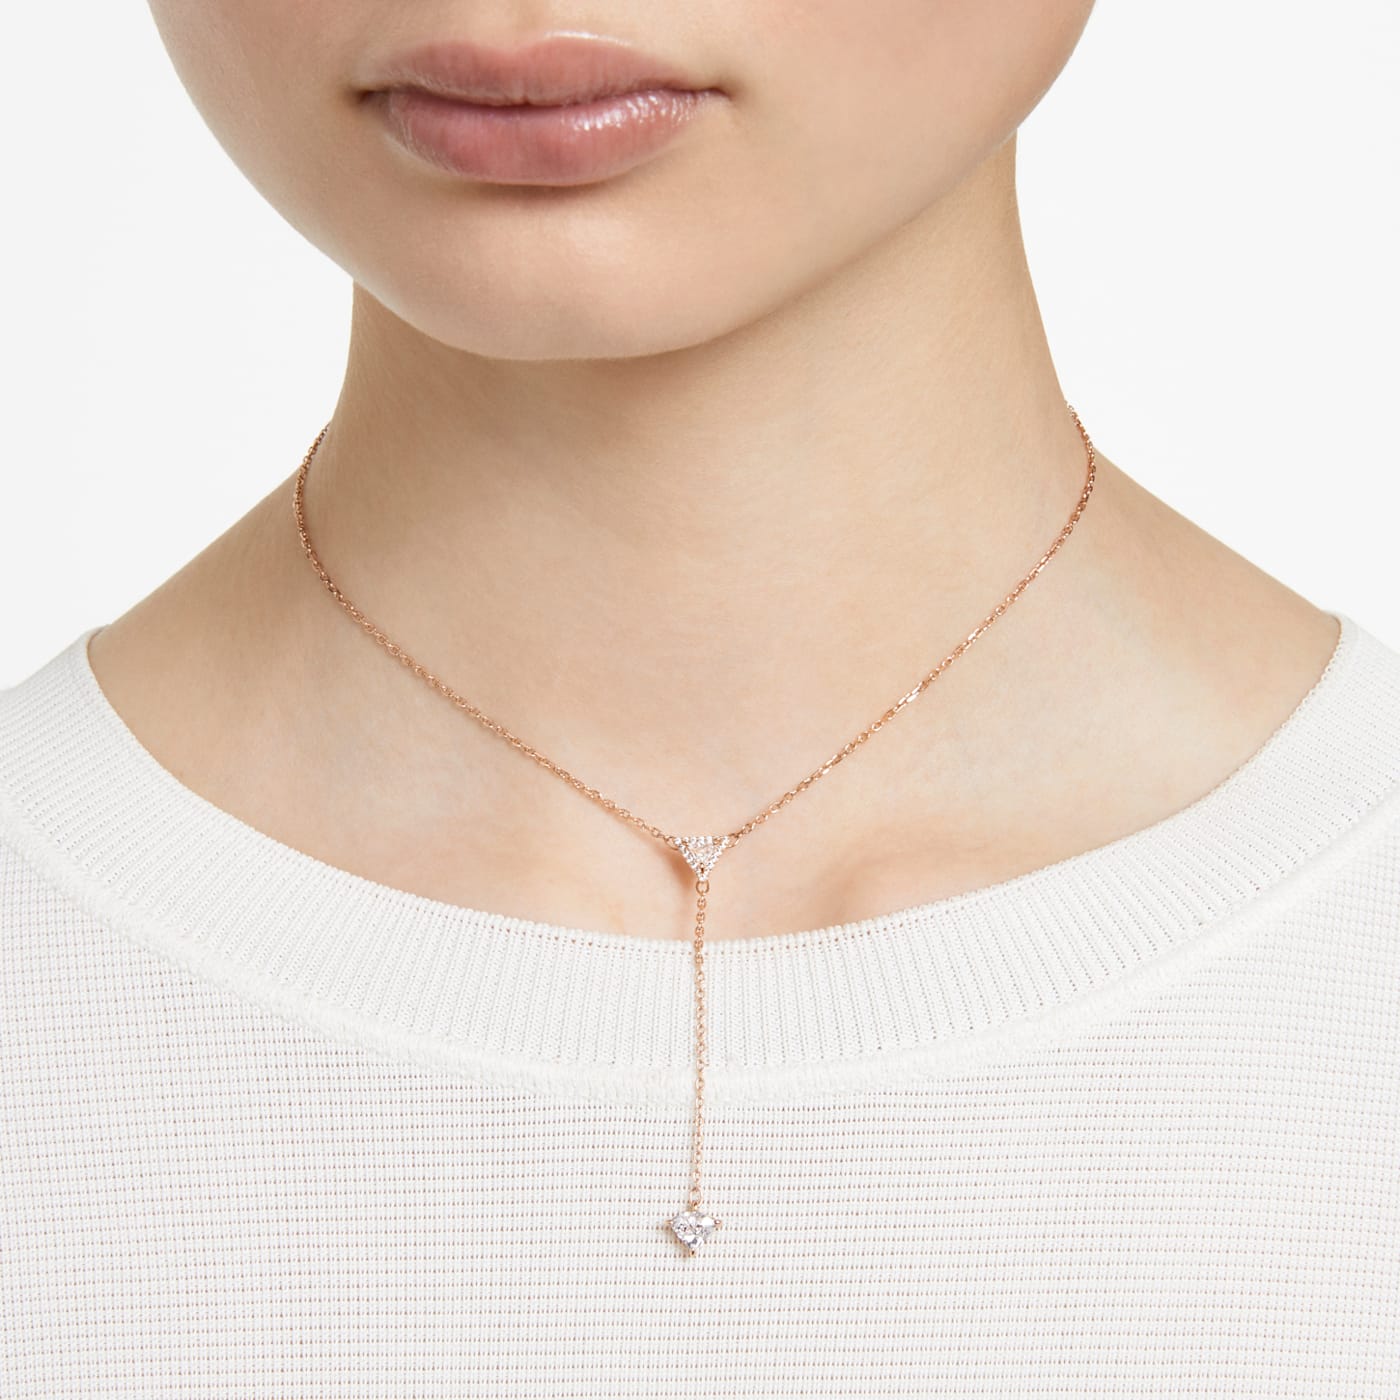 ORTYX Y NECKLACE, WHITE, RHODIUM PLATED